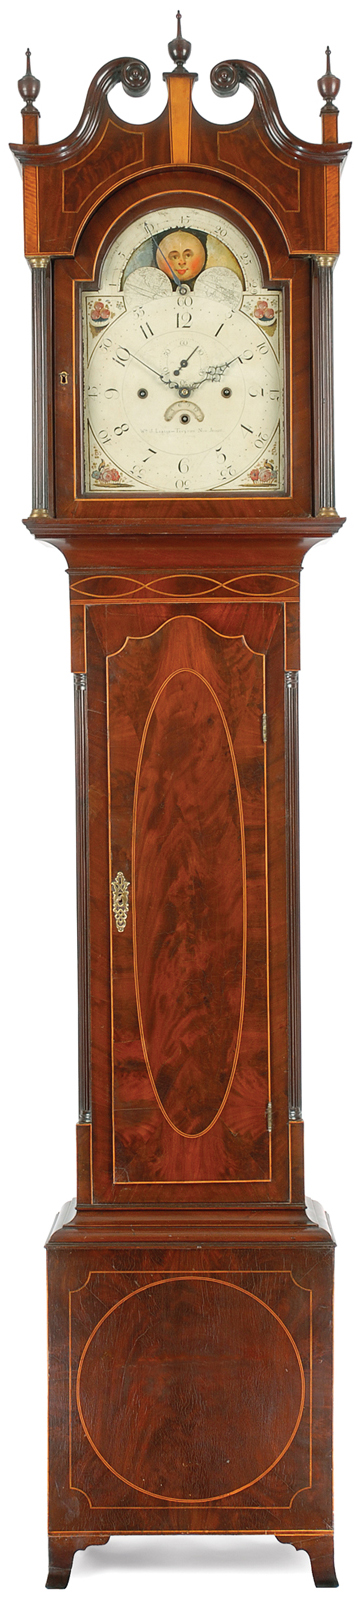 A rare and important musical tall case clock, by William J. Leslie, Trenton, New Jersey, circa 1795-1800.